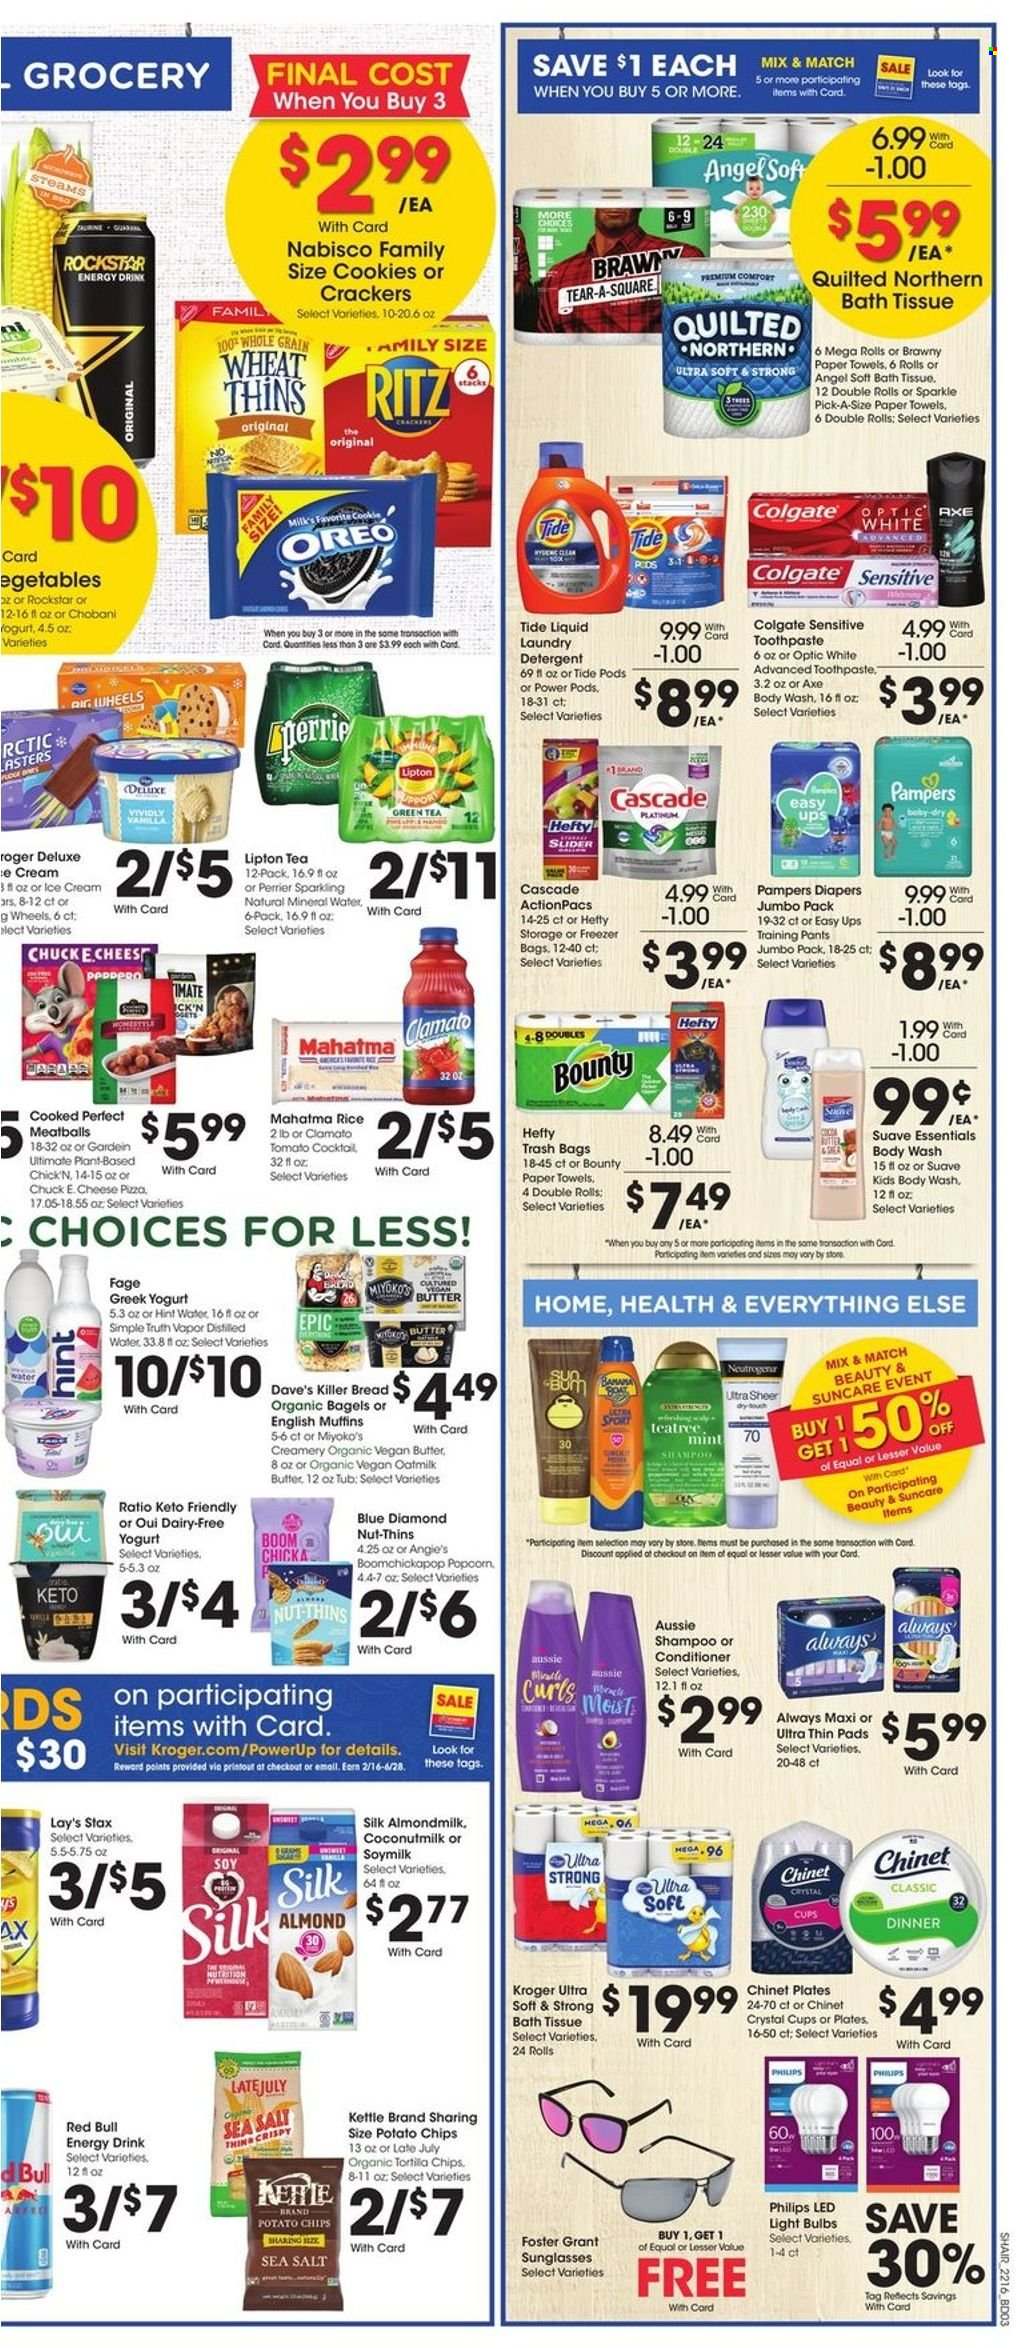 thumbnail - Kroger Flyer - 05/18/2022 - 05/24/2022 - Sales products - Philips, bagels, bread, english muffins, pizza, meatballs, greek yoghurt, Oreo, yoghurt, Chobani, almond milk, milk, soy milk, Silk, oat milk, butter, ice cream, cookies, Bounty, crackers, RITZ, tortilla chips, potato chips, chips, Lay’s, Thins, popcorn, coconut milk, rice, Blue Diamond, energy drink, Lipton, Clamato, Red Bull, Perrier, Rockstar, mineral water, green tea, tea, Pampers, pants, nappies, baby pants, bath tissue, Quilted Northern, kitchen towels, paper towels, detergent, Cascade, Tide, laundry detergent, body wash, shampoo, Suave, Colgate, toothpaste, Aussie, conditioner, Axe, Hefty, trash bags, plate, cup, freezer bag, bulb, light bulb, freezer, sunglasses, LED light, distilled water. Page 6.